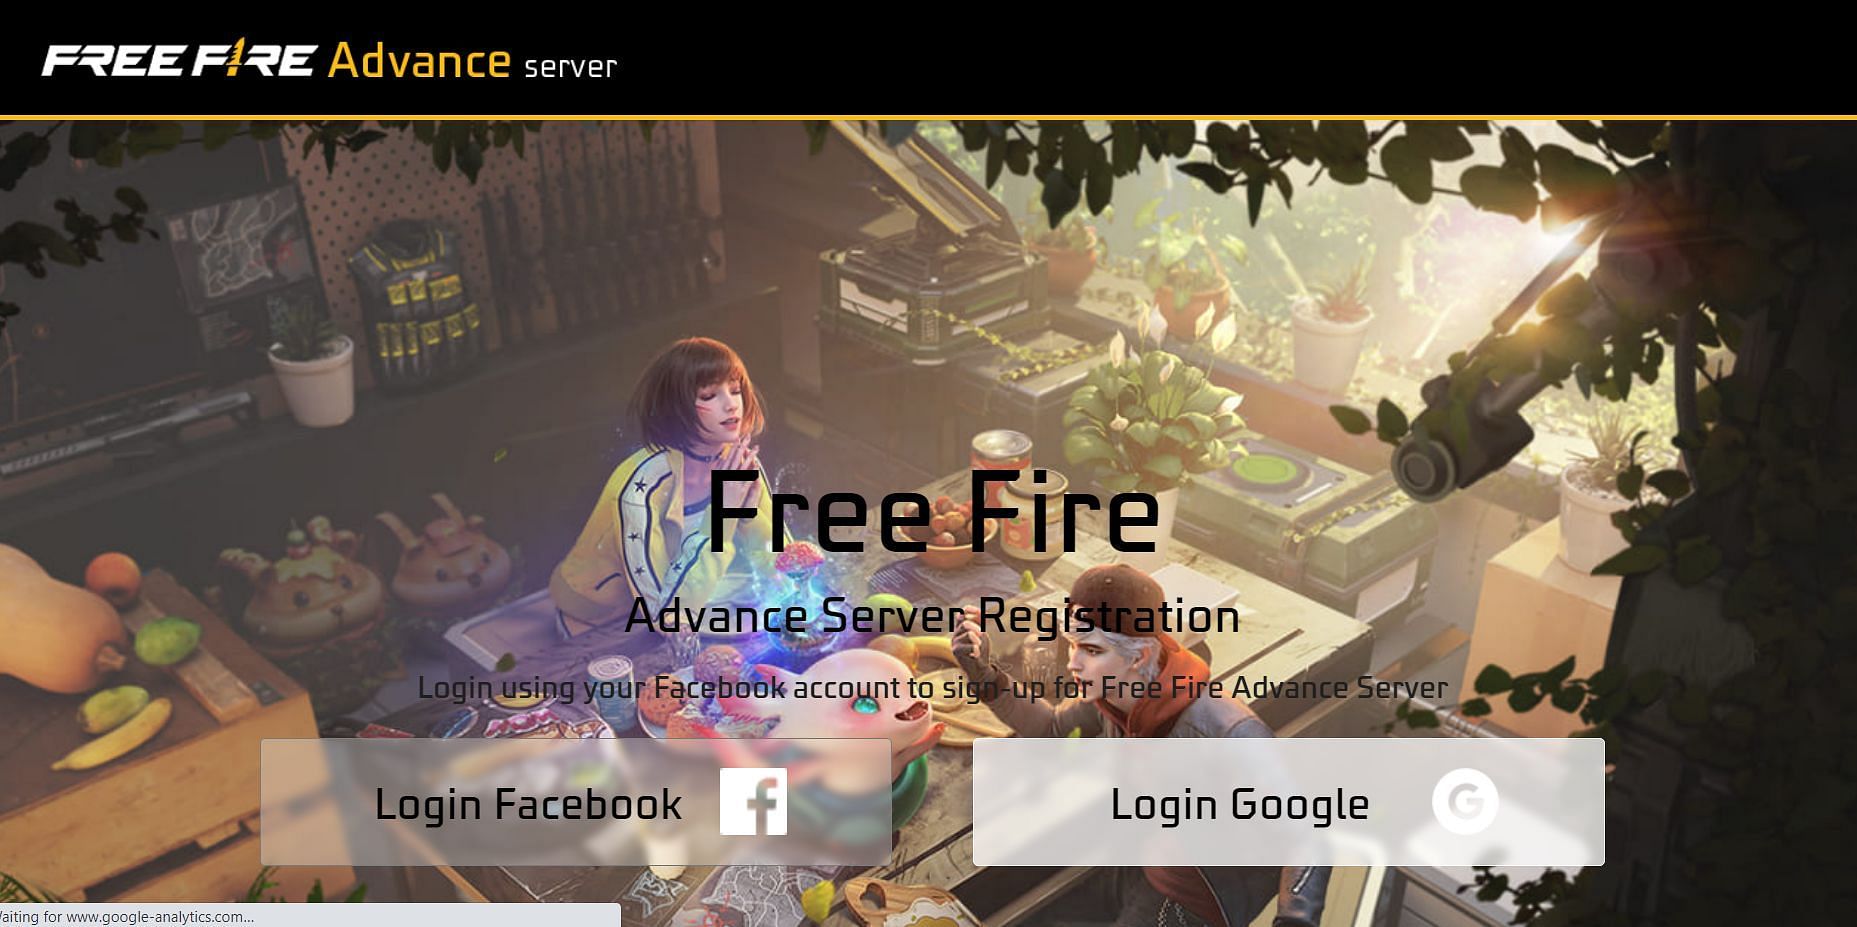 You can choose between Gmail or Facebook to sign in (Image via Garena)